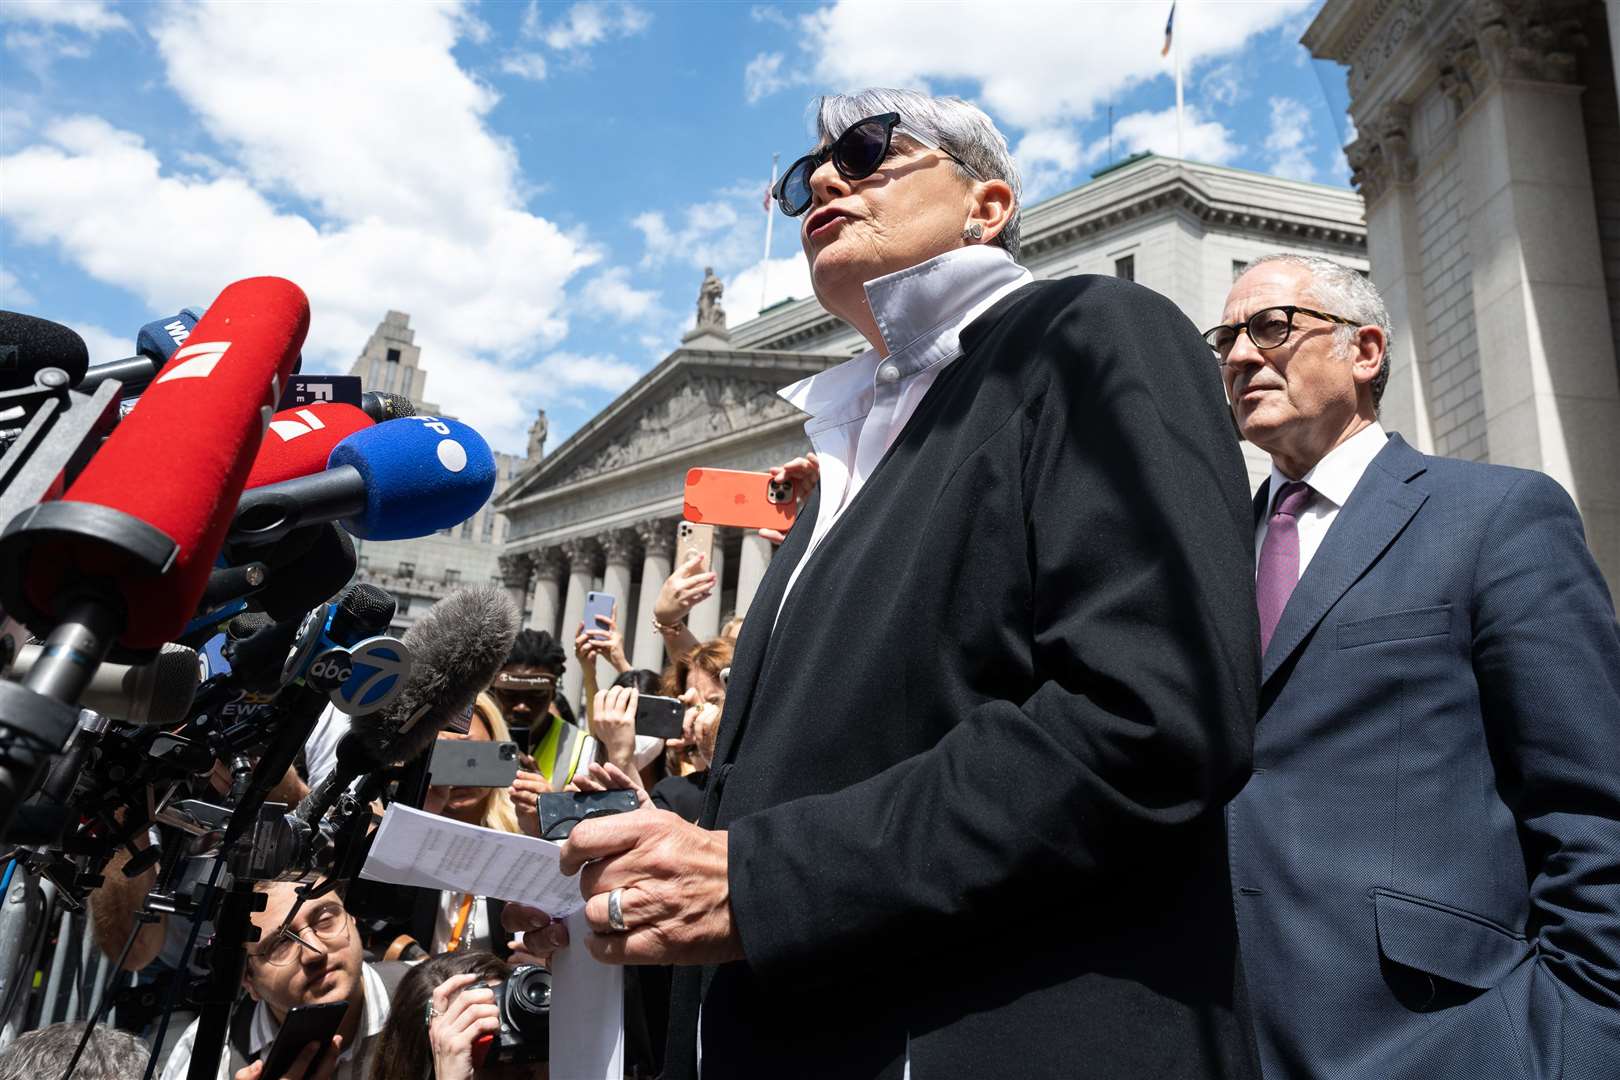 Ghishlaine Maxwell’s lawyer Bobbi Sternheim addresses the press outside the Federal Courthouse in lower Manhattan in New York (Gabriele Holtermann/PA)